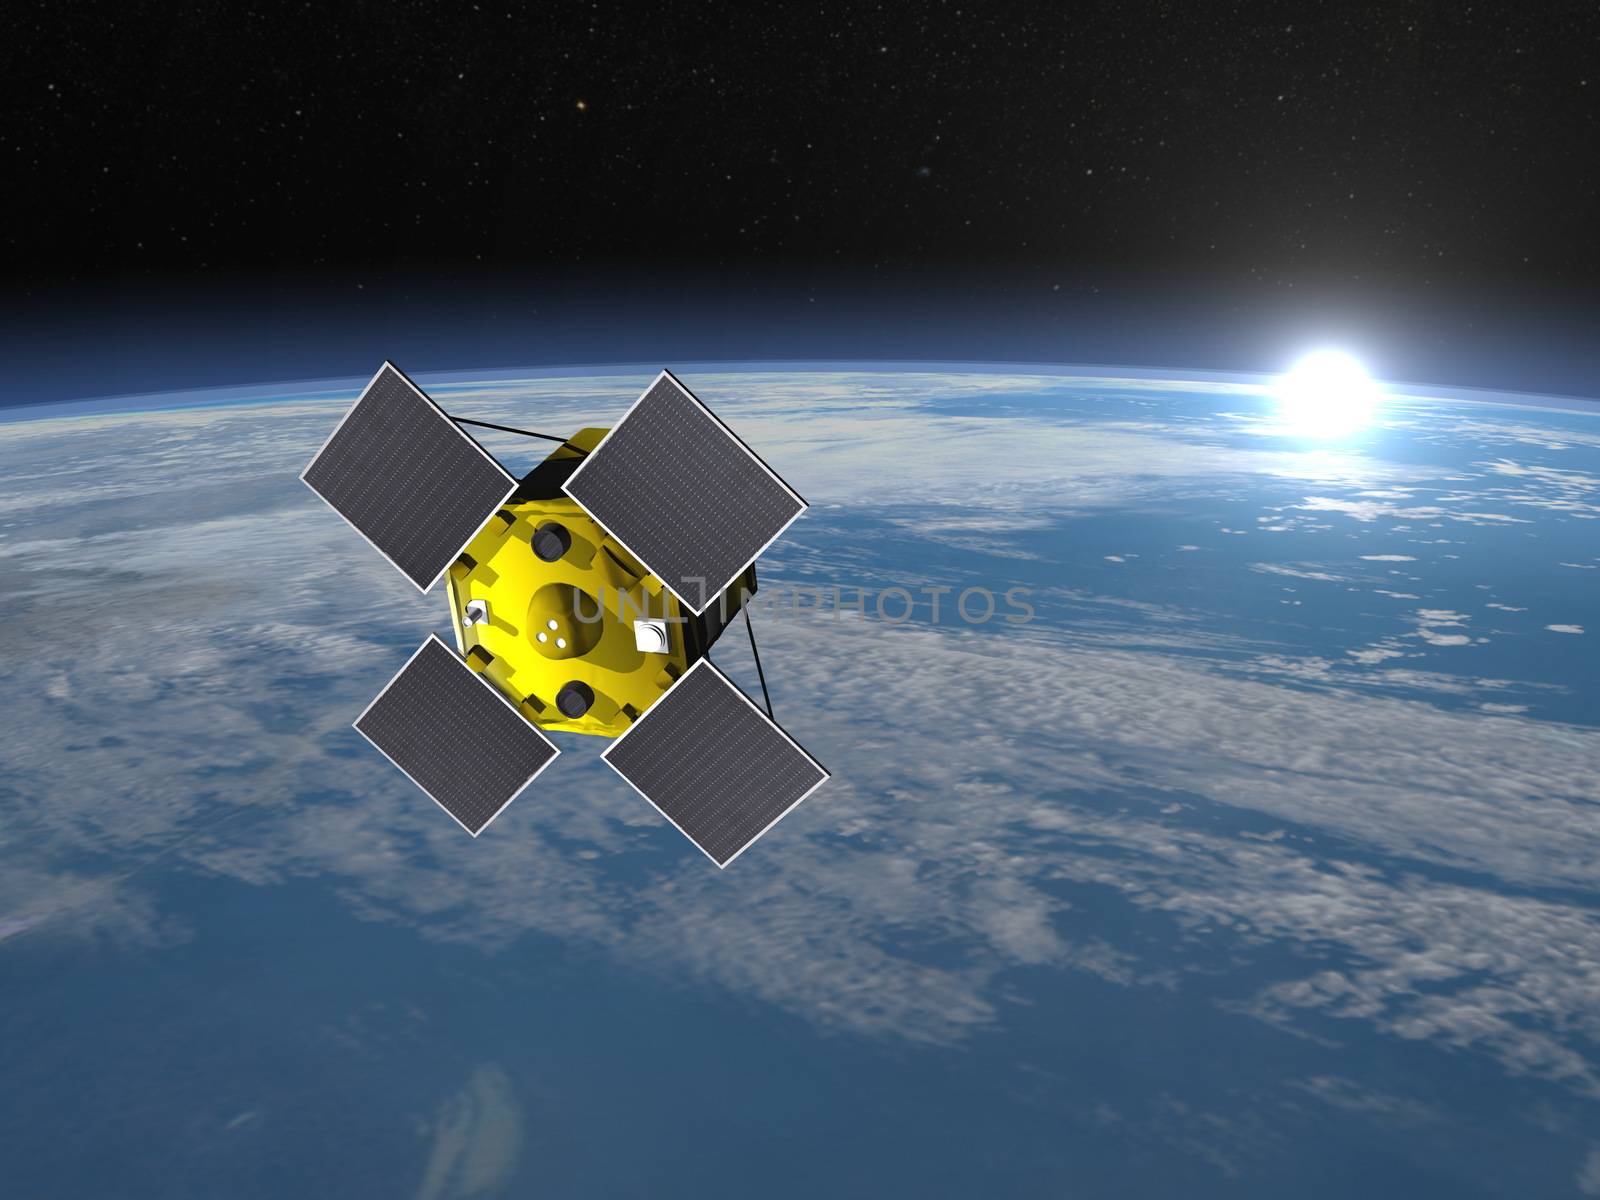 Acrimsat satellite in space upon earth and rising sun, elements of this image furnished by NASA - 3D render